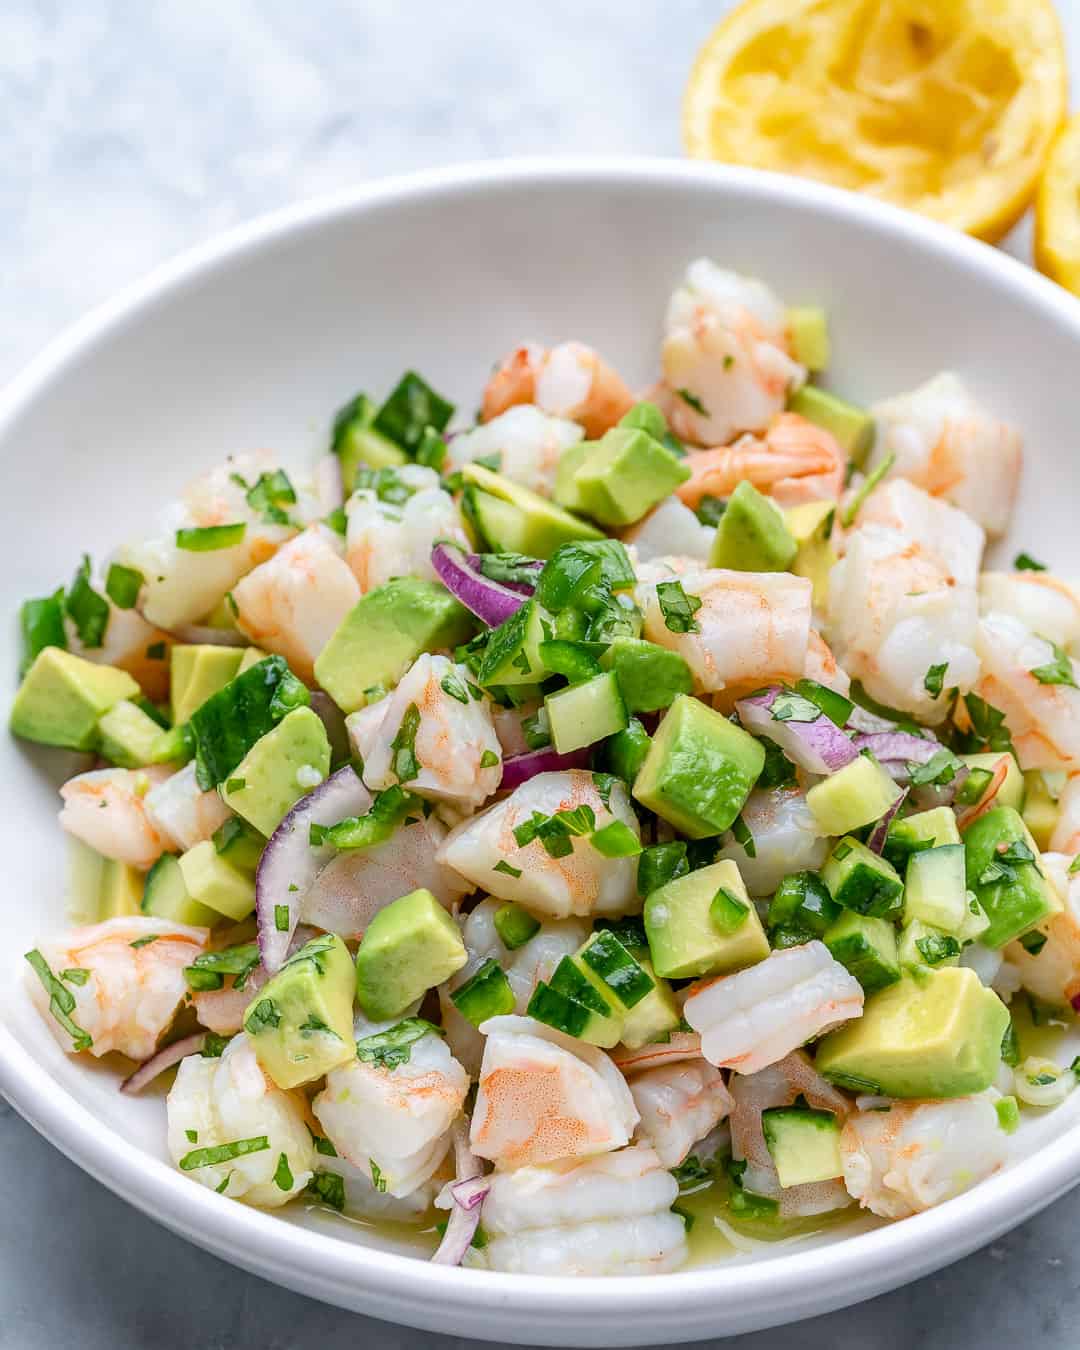 How to make shrimp ceviche - ceviche in a bowl